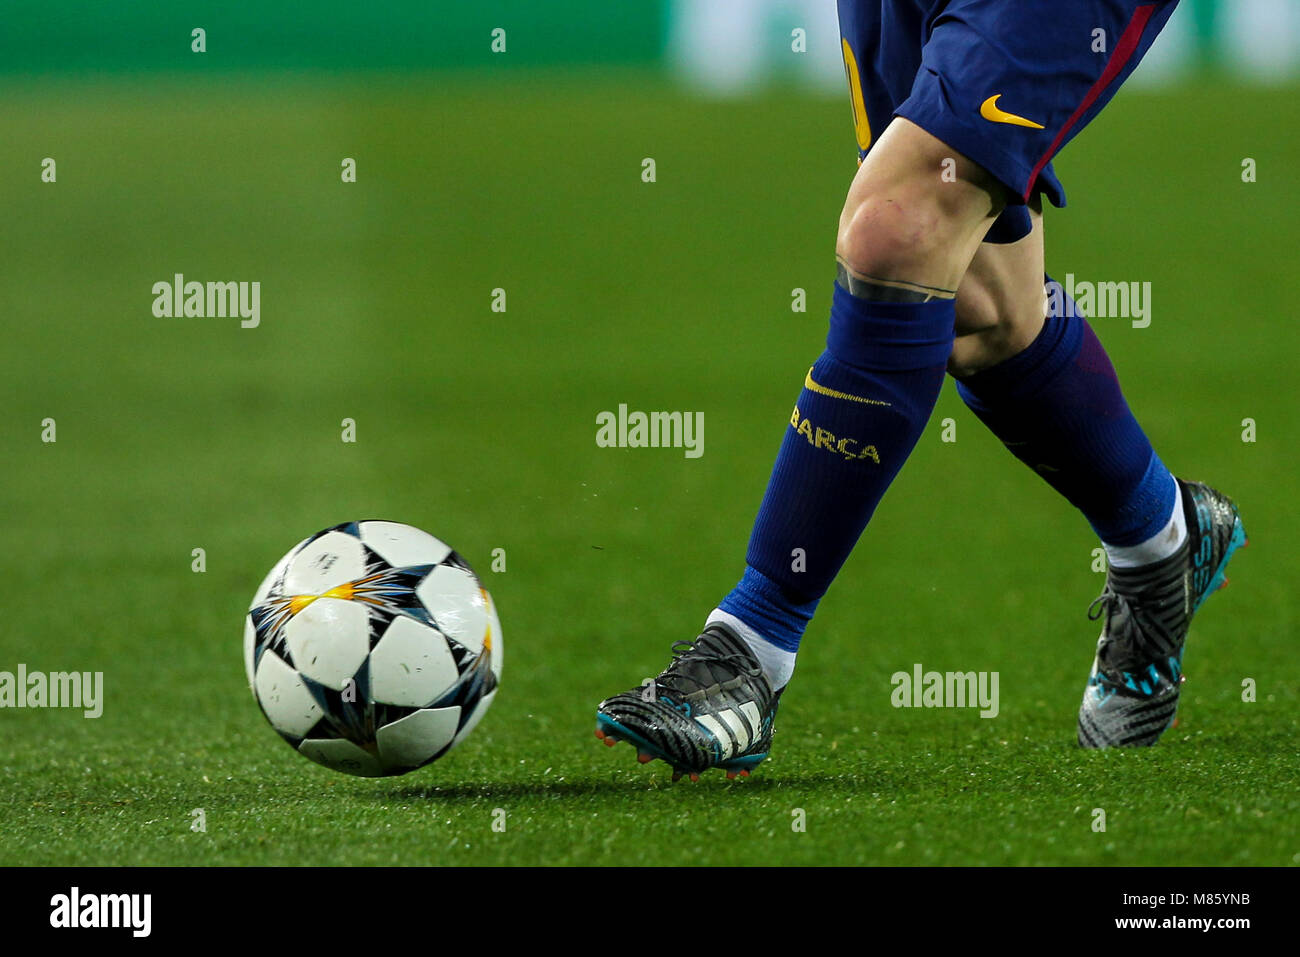 Barcelona, Spain. 14th March 2018; Boots of Lionel Messi, #10 player of FC  Barcelona during the 2017/2018 UEFA Champions League Round of 16 game  between FC Barcelona and Chelsea at Camp Nou